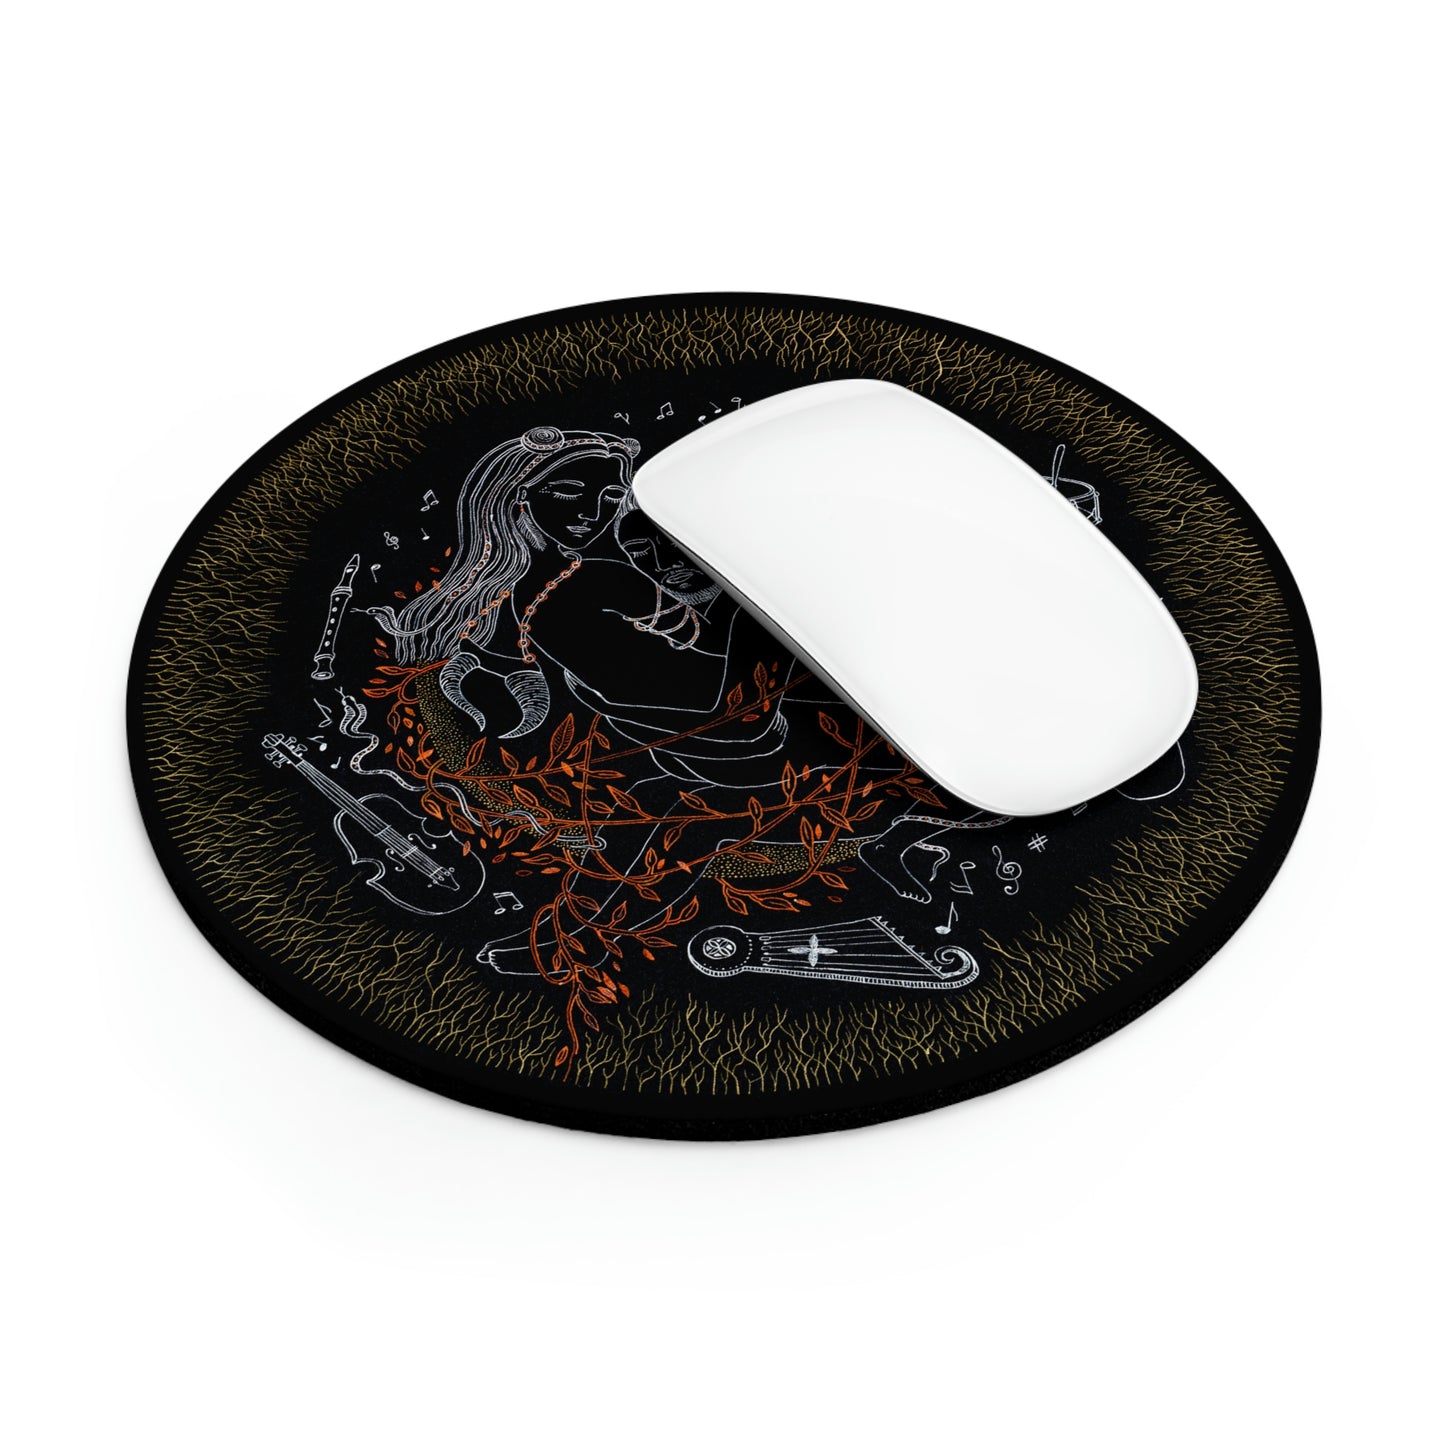 Chinese Zodiac Sign Mouse Pad (Ox)